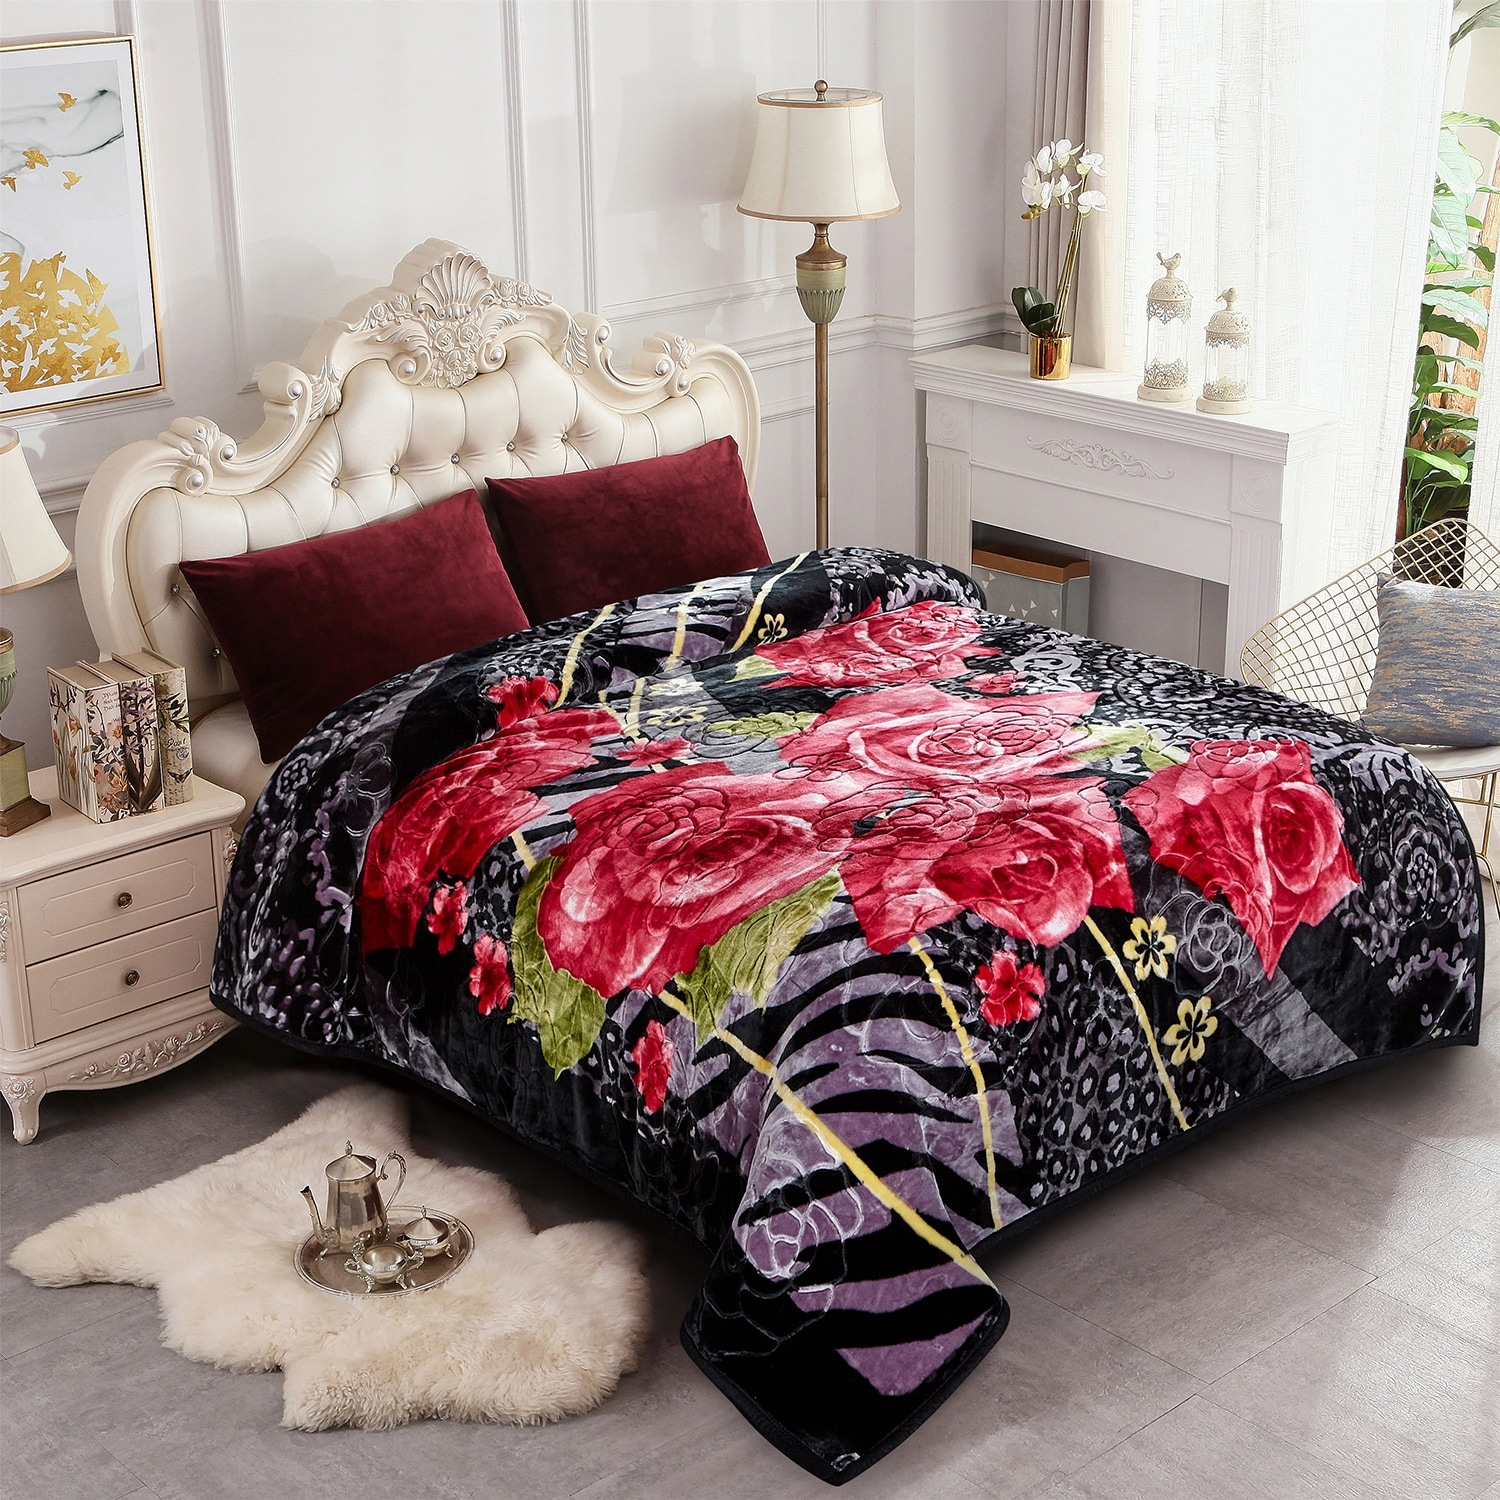 https://ak1.ostkcdn.com/images/products/is/images/direct/5c8856416326992a176f68840968c7bd4cfcfb58/Luxury-Heavy-Thick-Plush-Blanket-2-Ply-A%26B-Disign-For-Winter-79%22x91%22-9-lbs.jpg